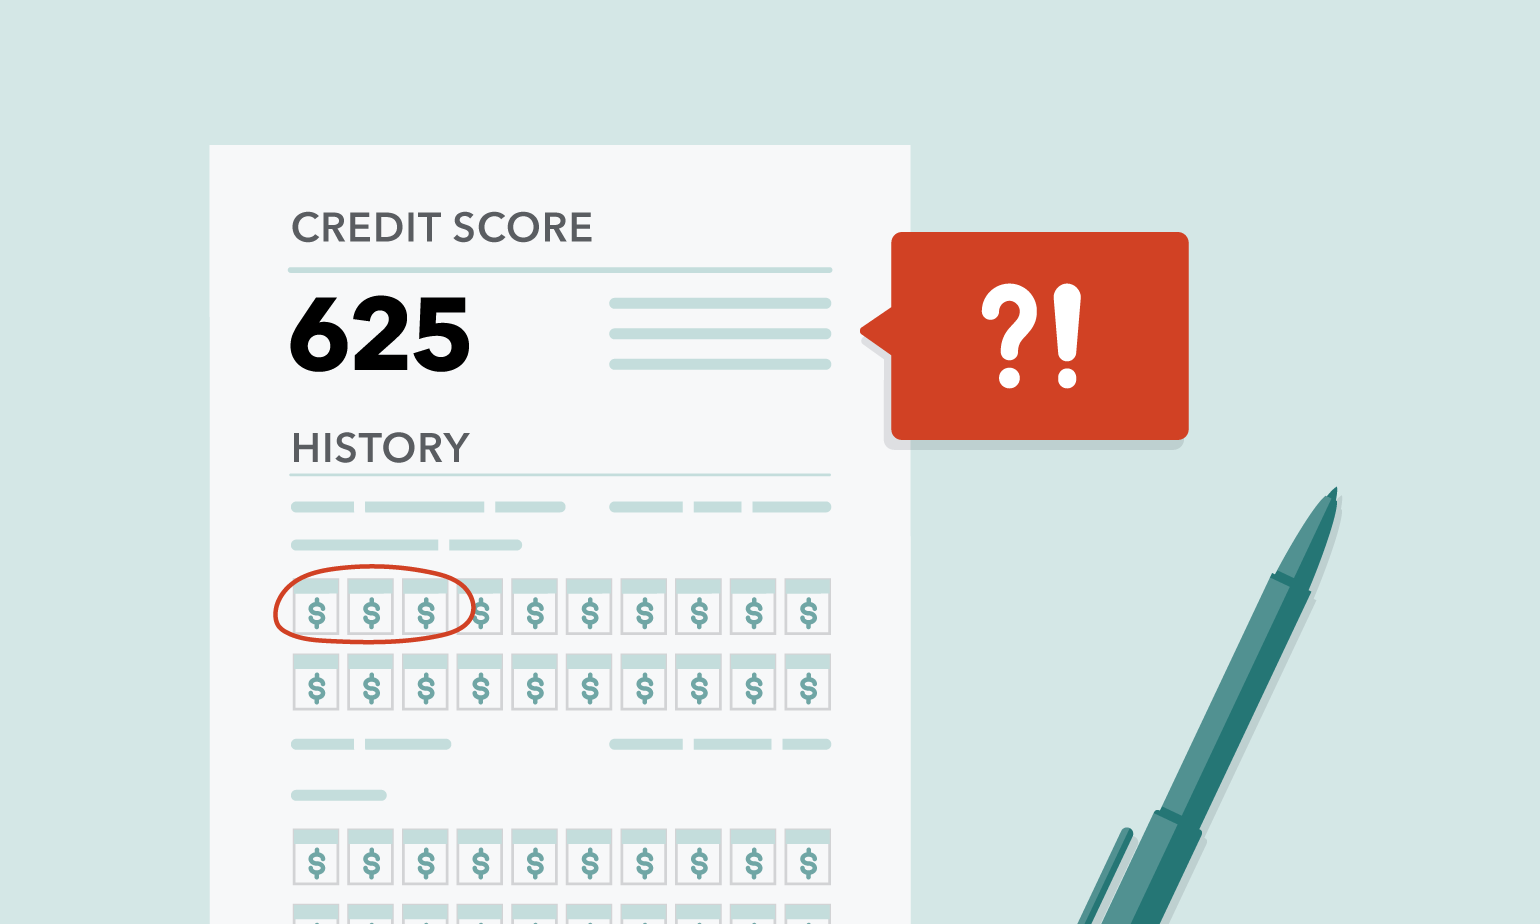 Common errors people find on their credit report